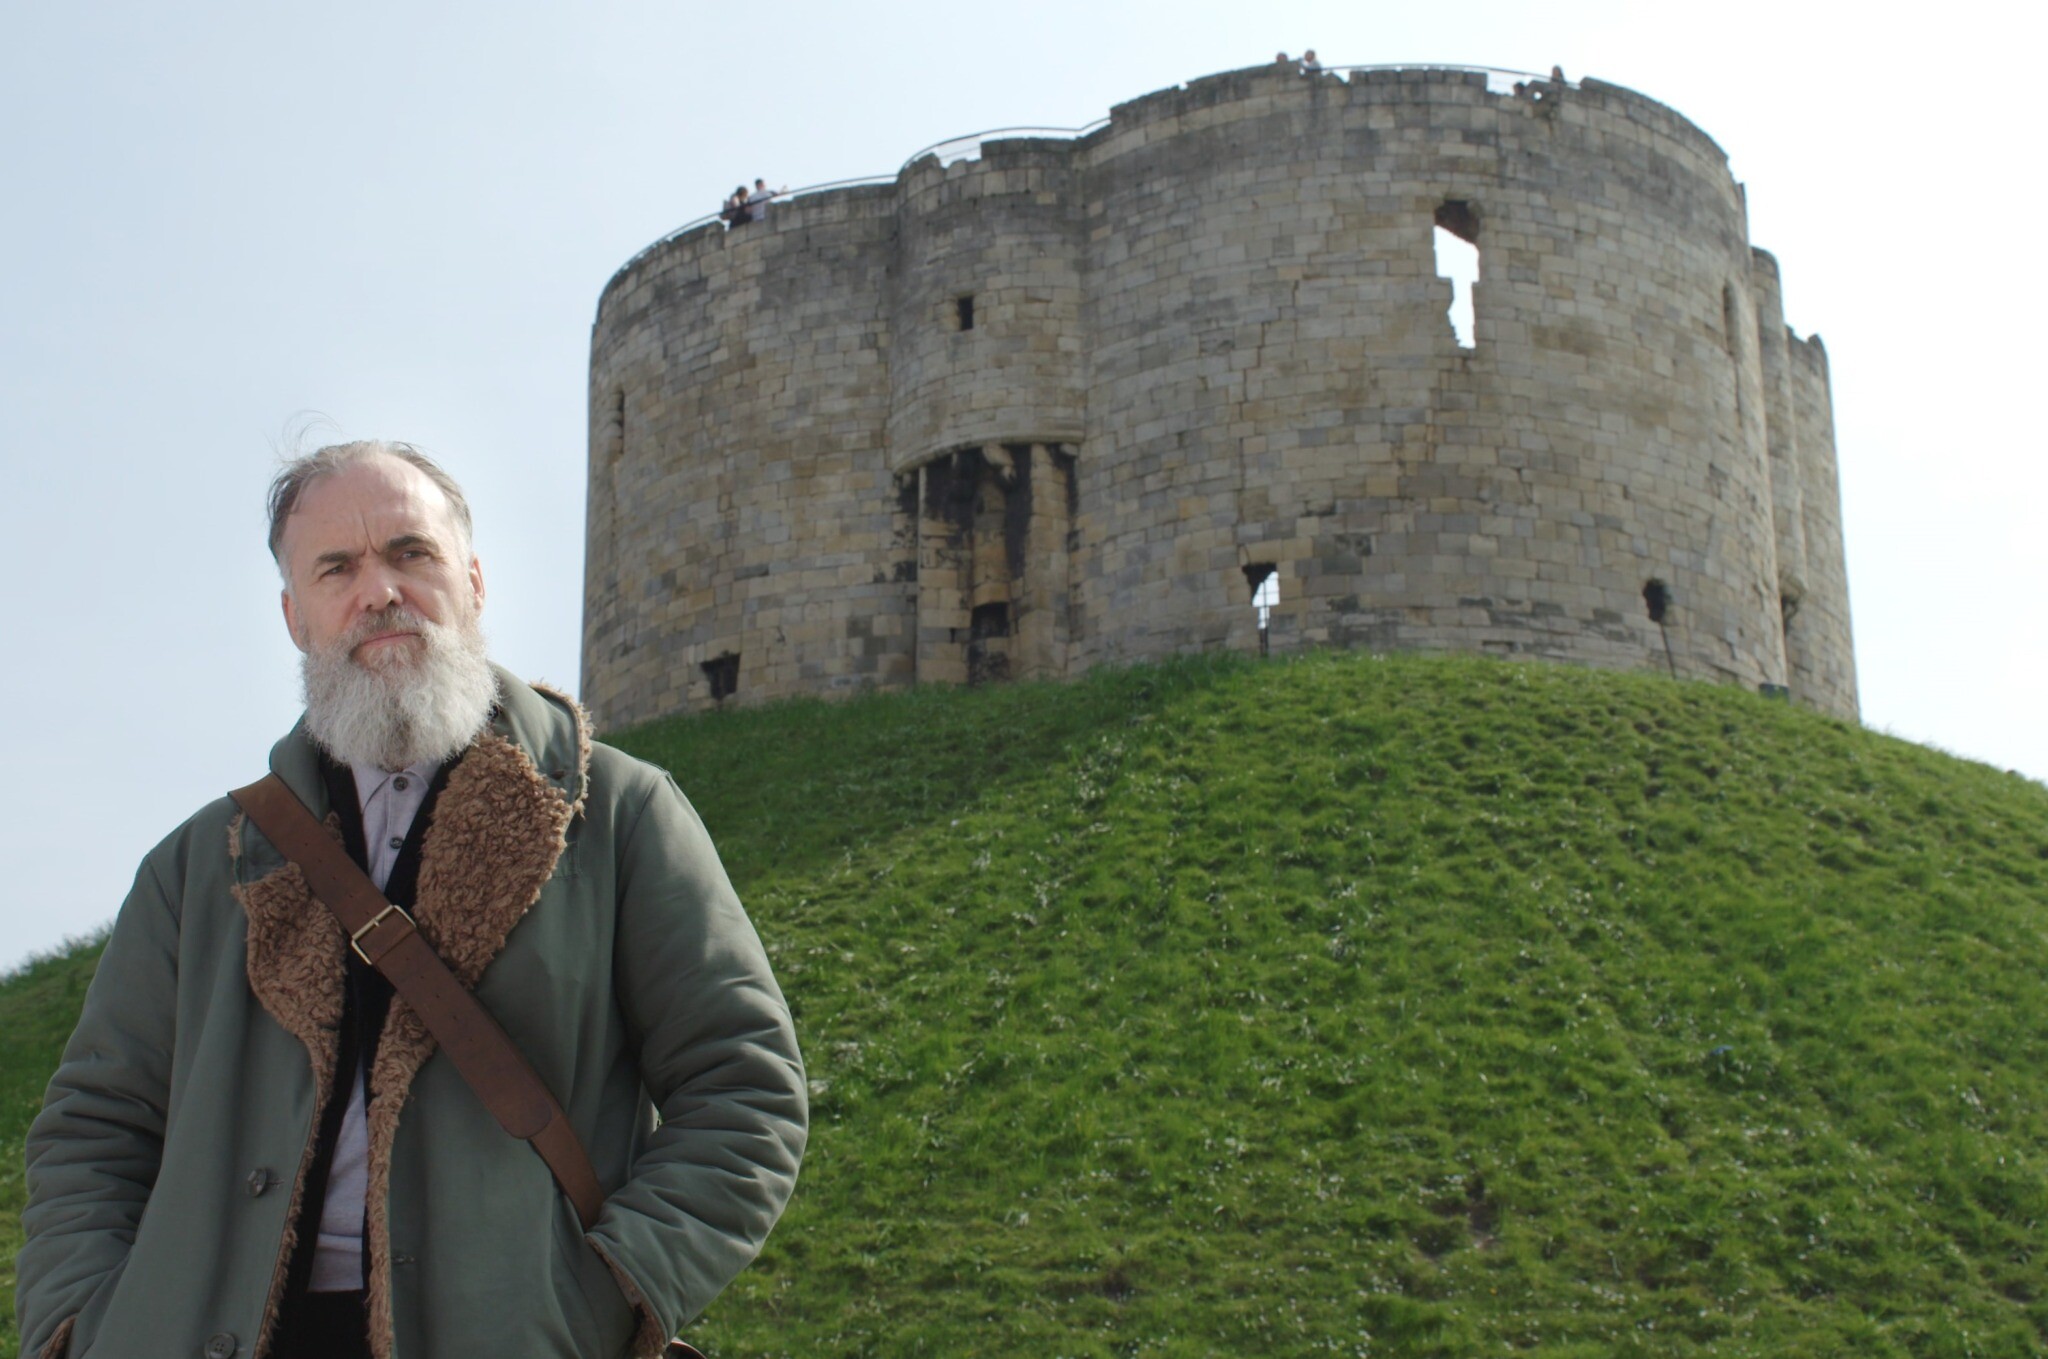 Filmmaker David Wilkinson at castle in York, where the entire Jewish community was murdered in 1190 (courtesy)